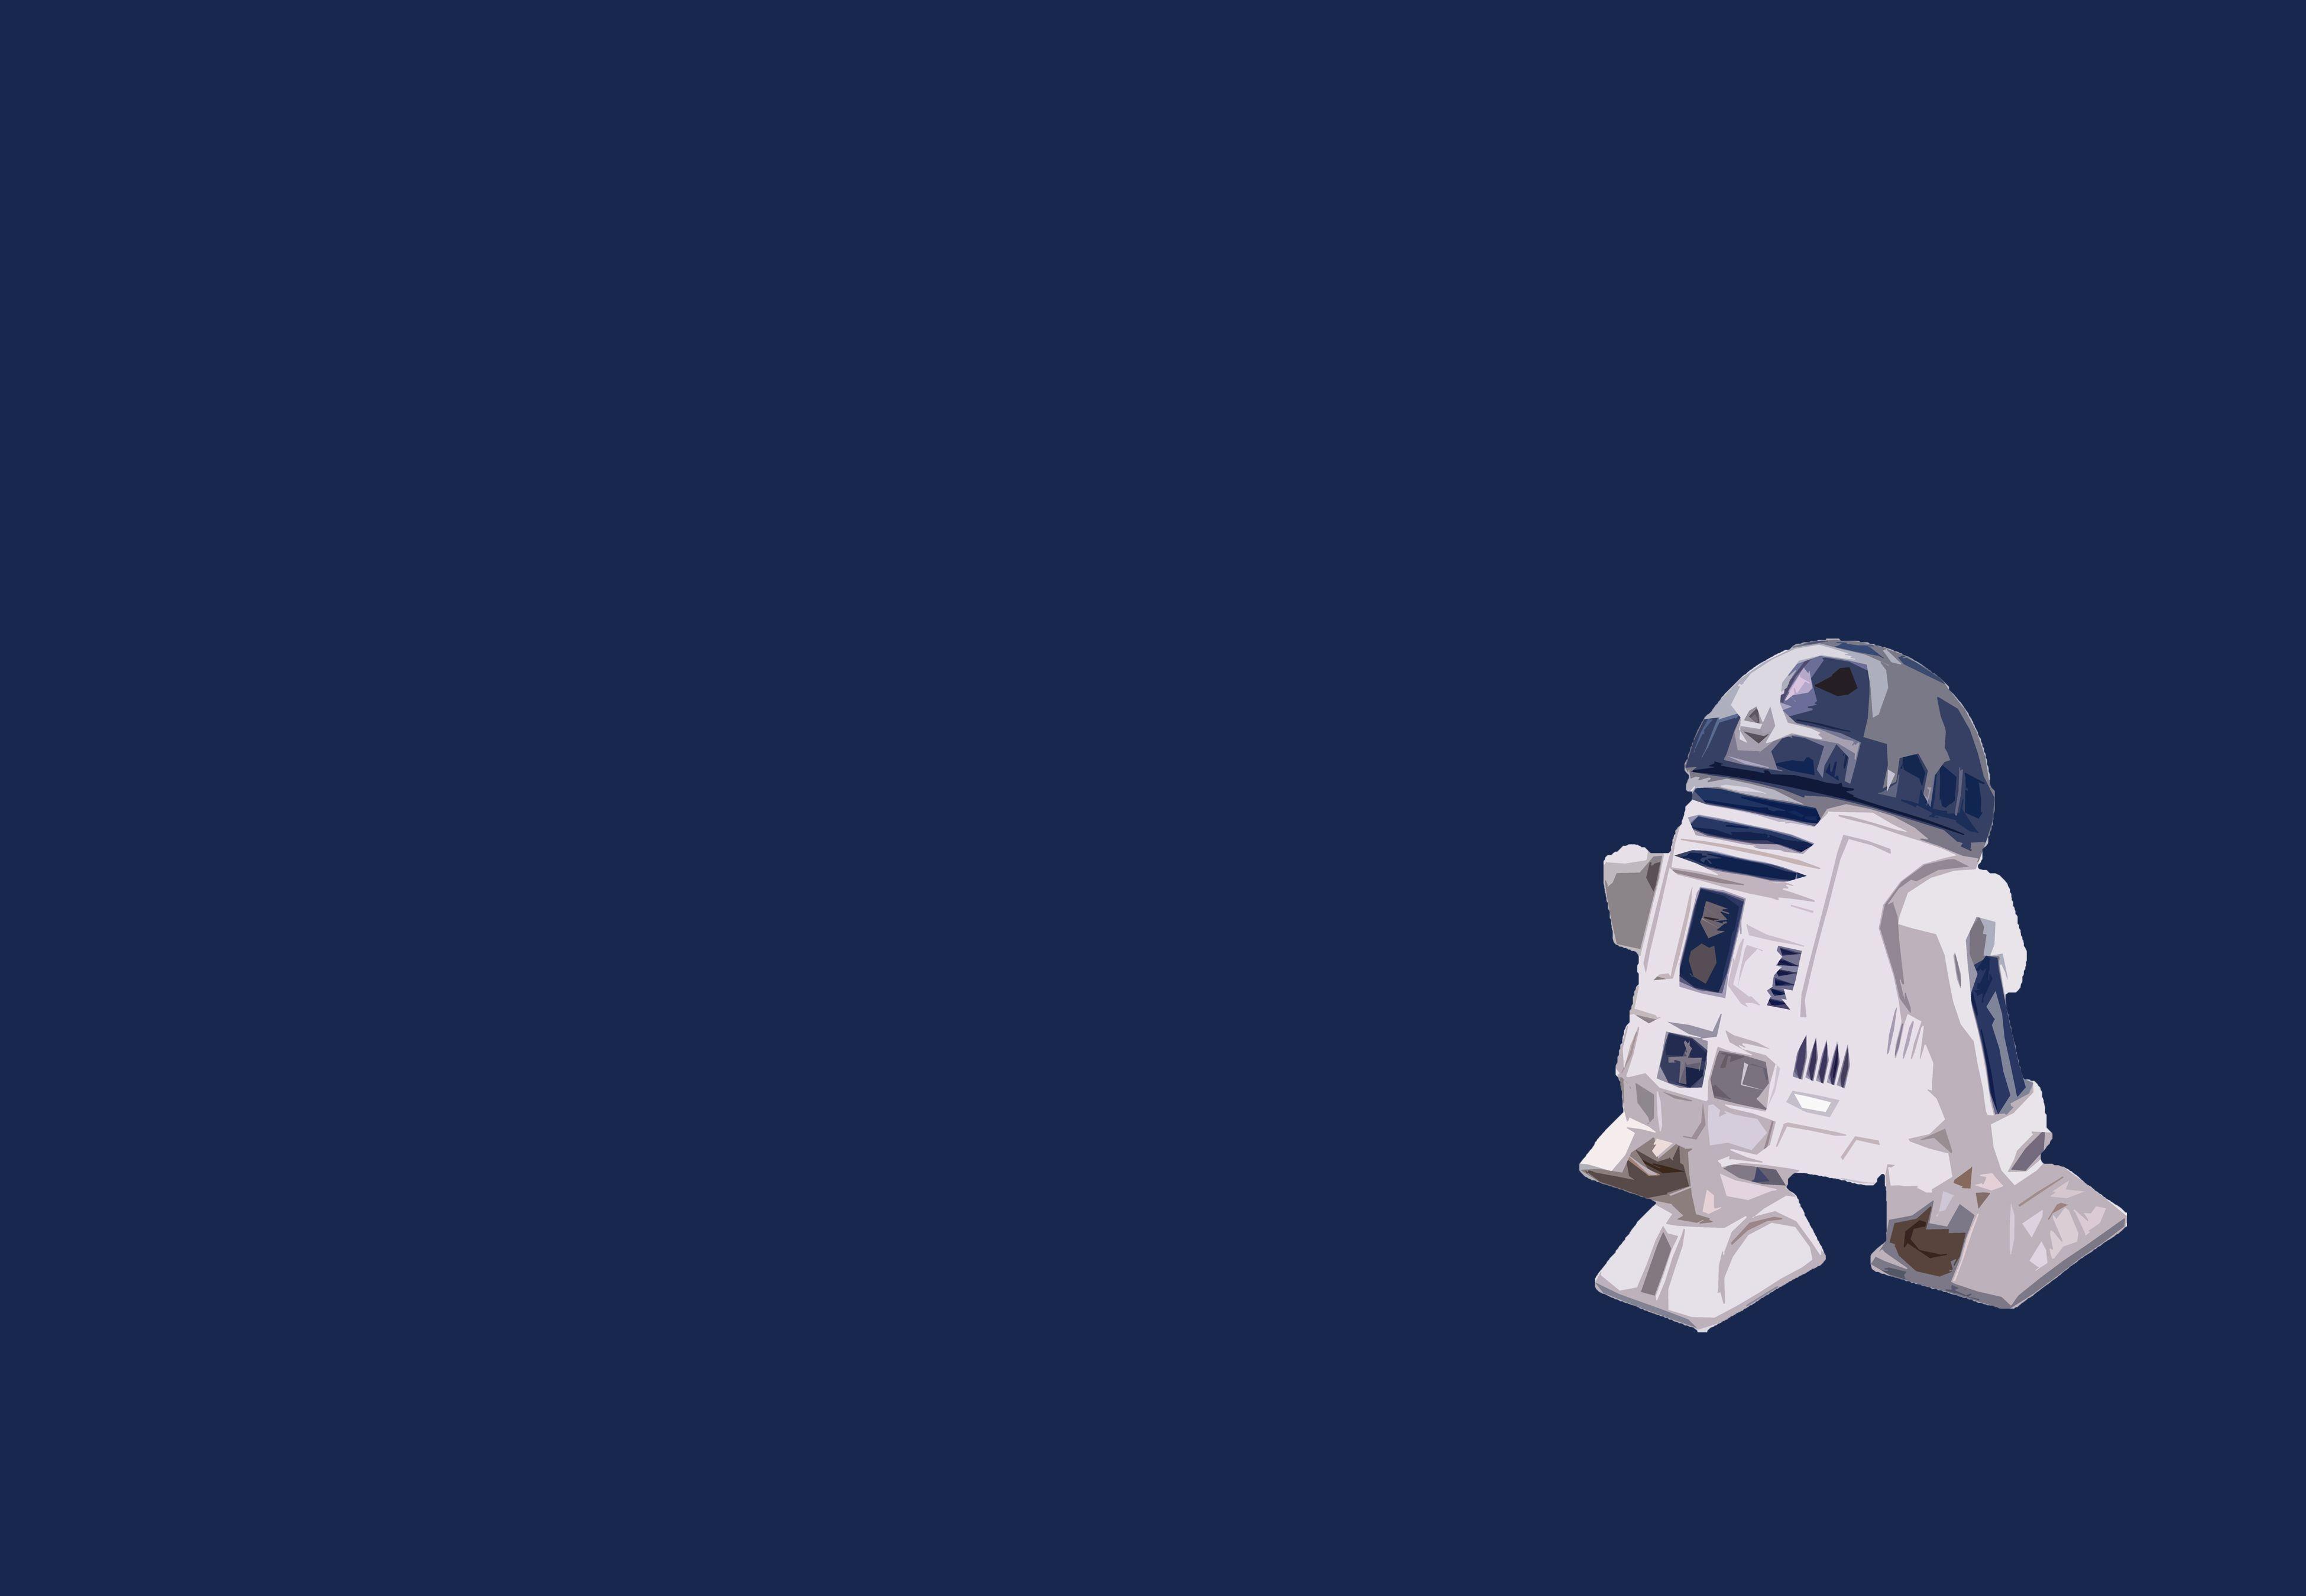 1116373 drawing white illustration Star Wars minimalism wall blue R2  D2 shape design sketch  Rare Gallery HD Wallpapers